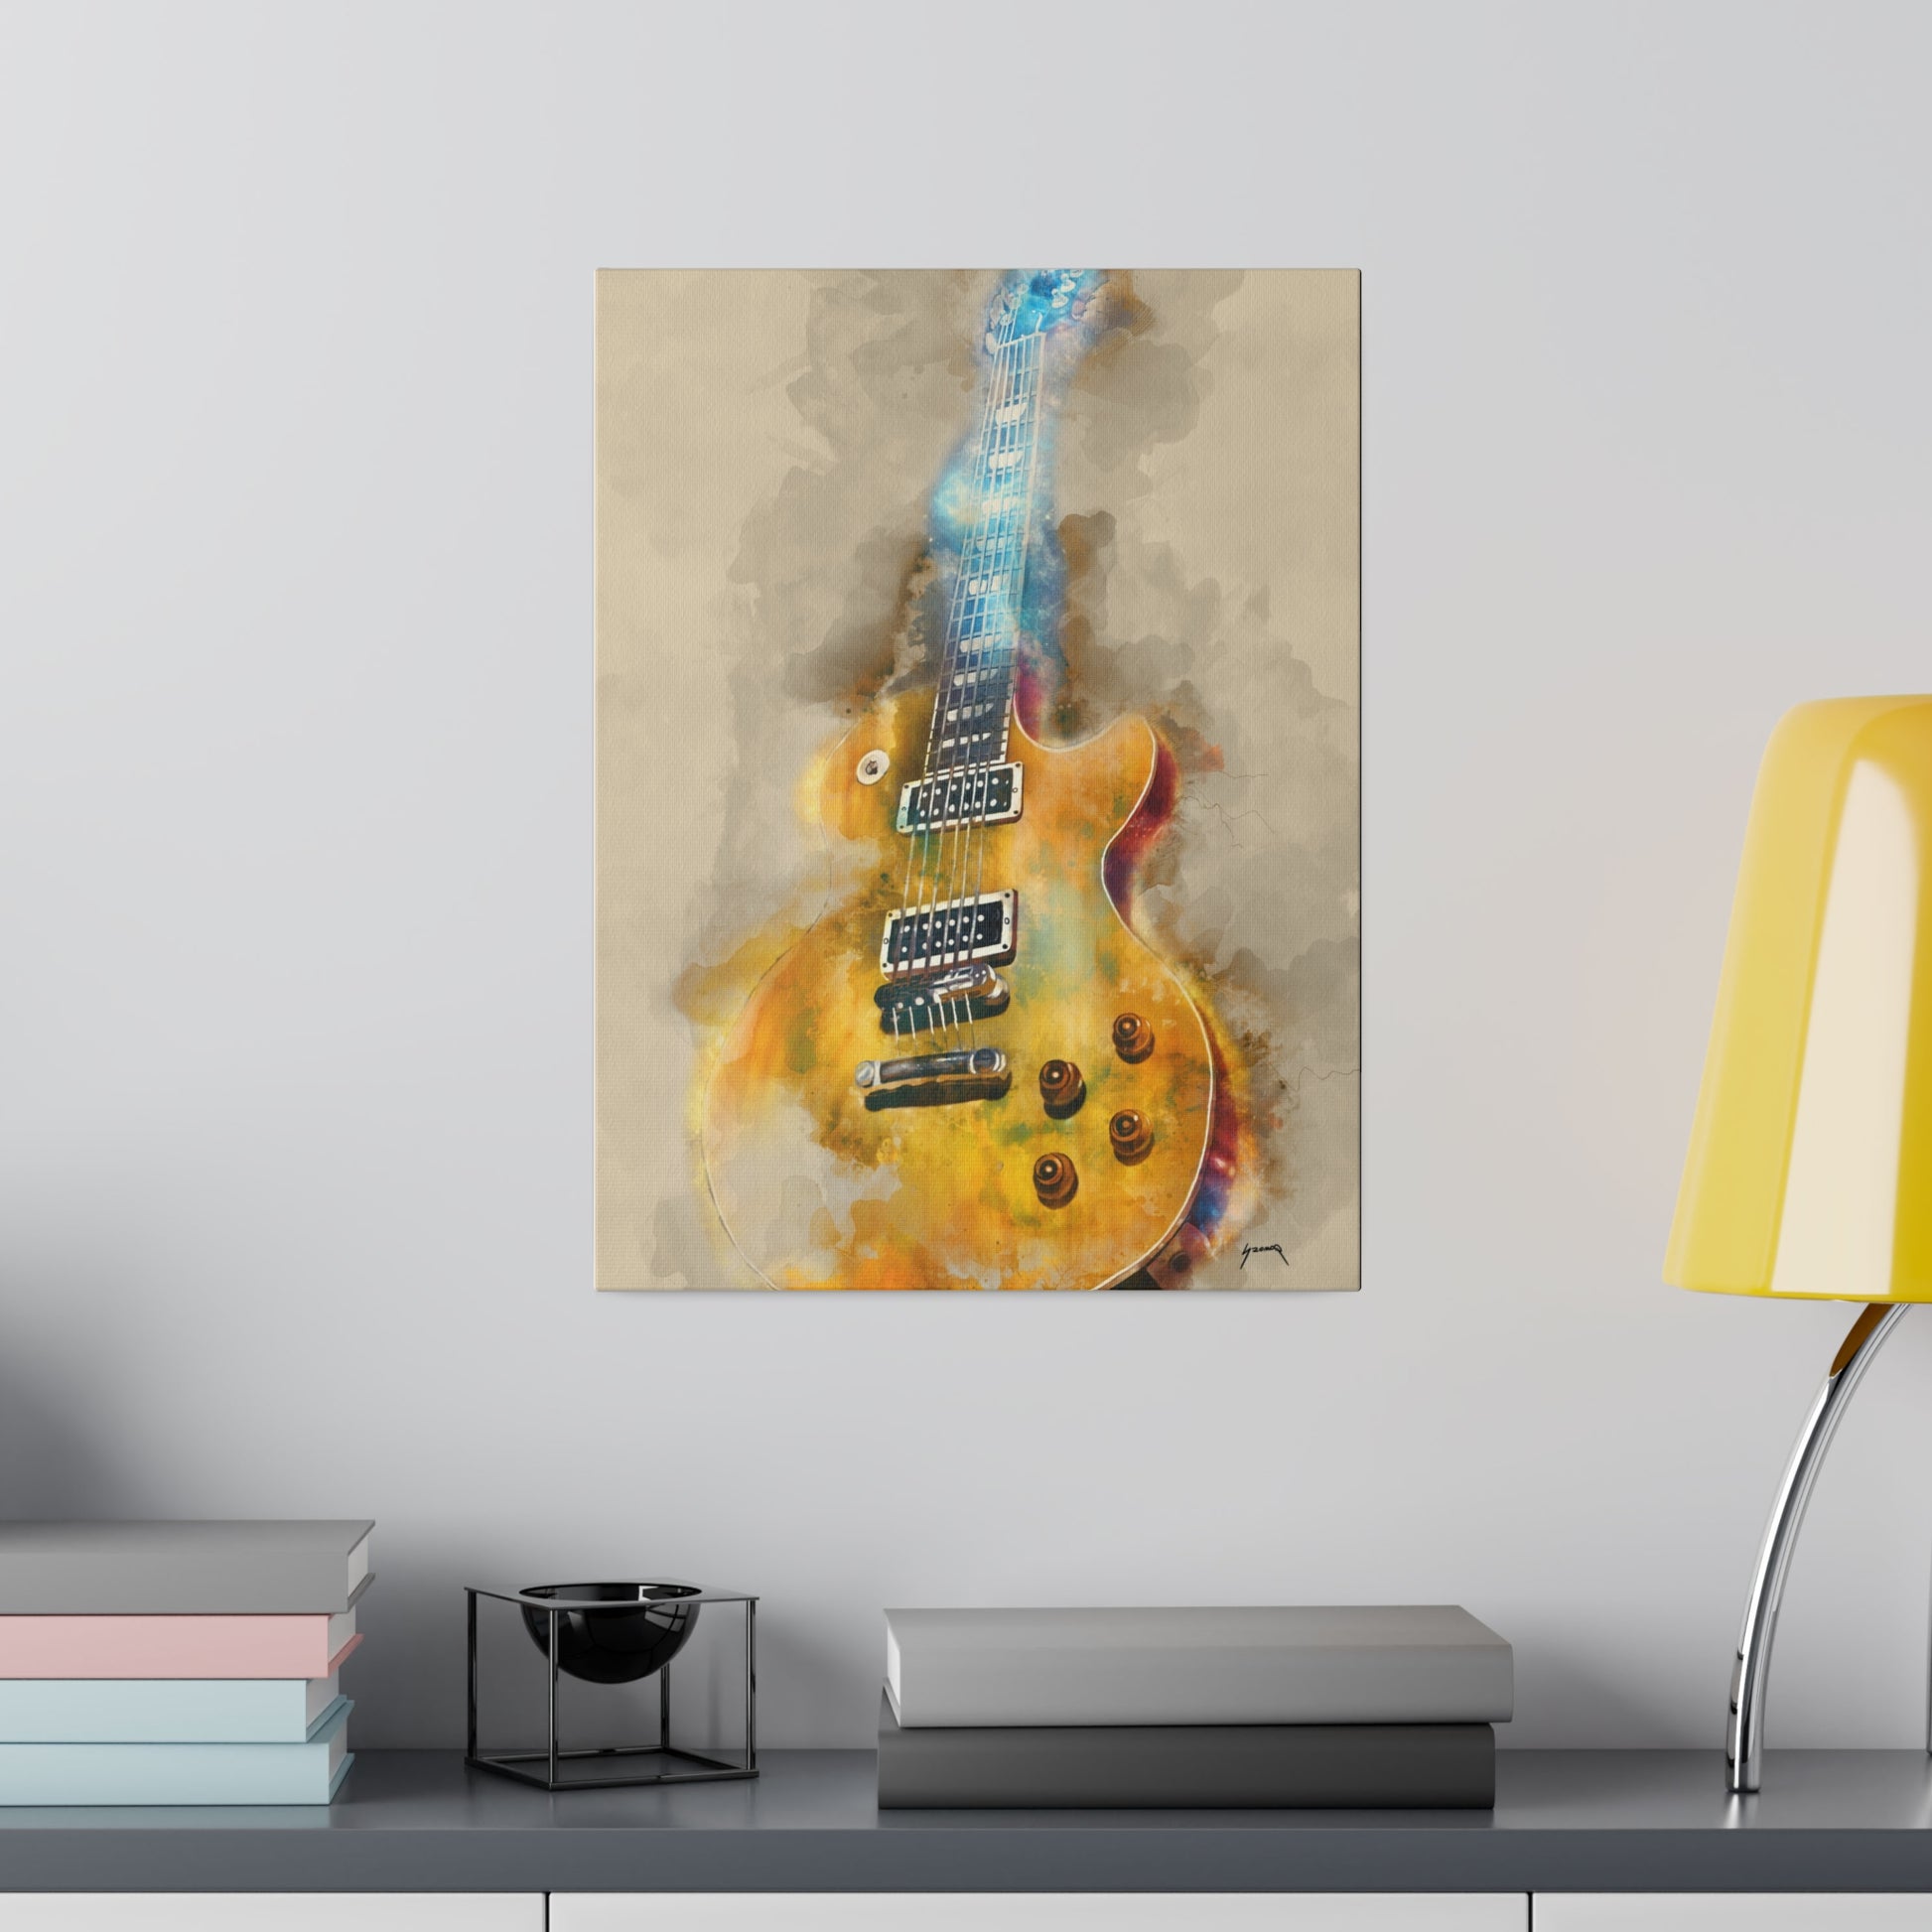 Digital painting of an electric guitar printed on canvas